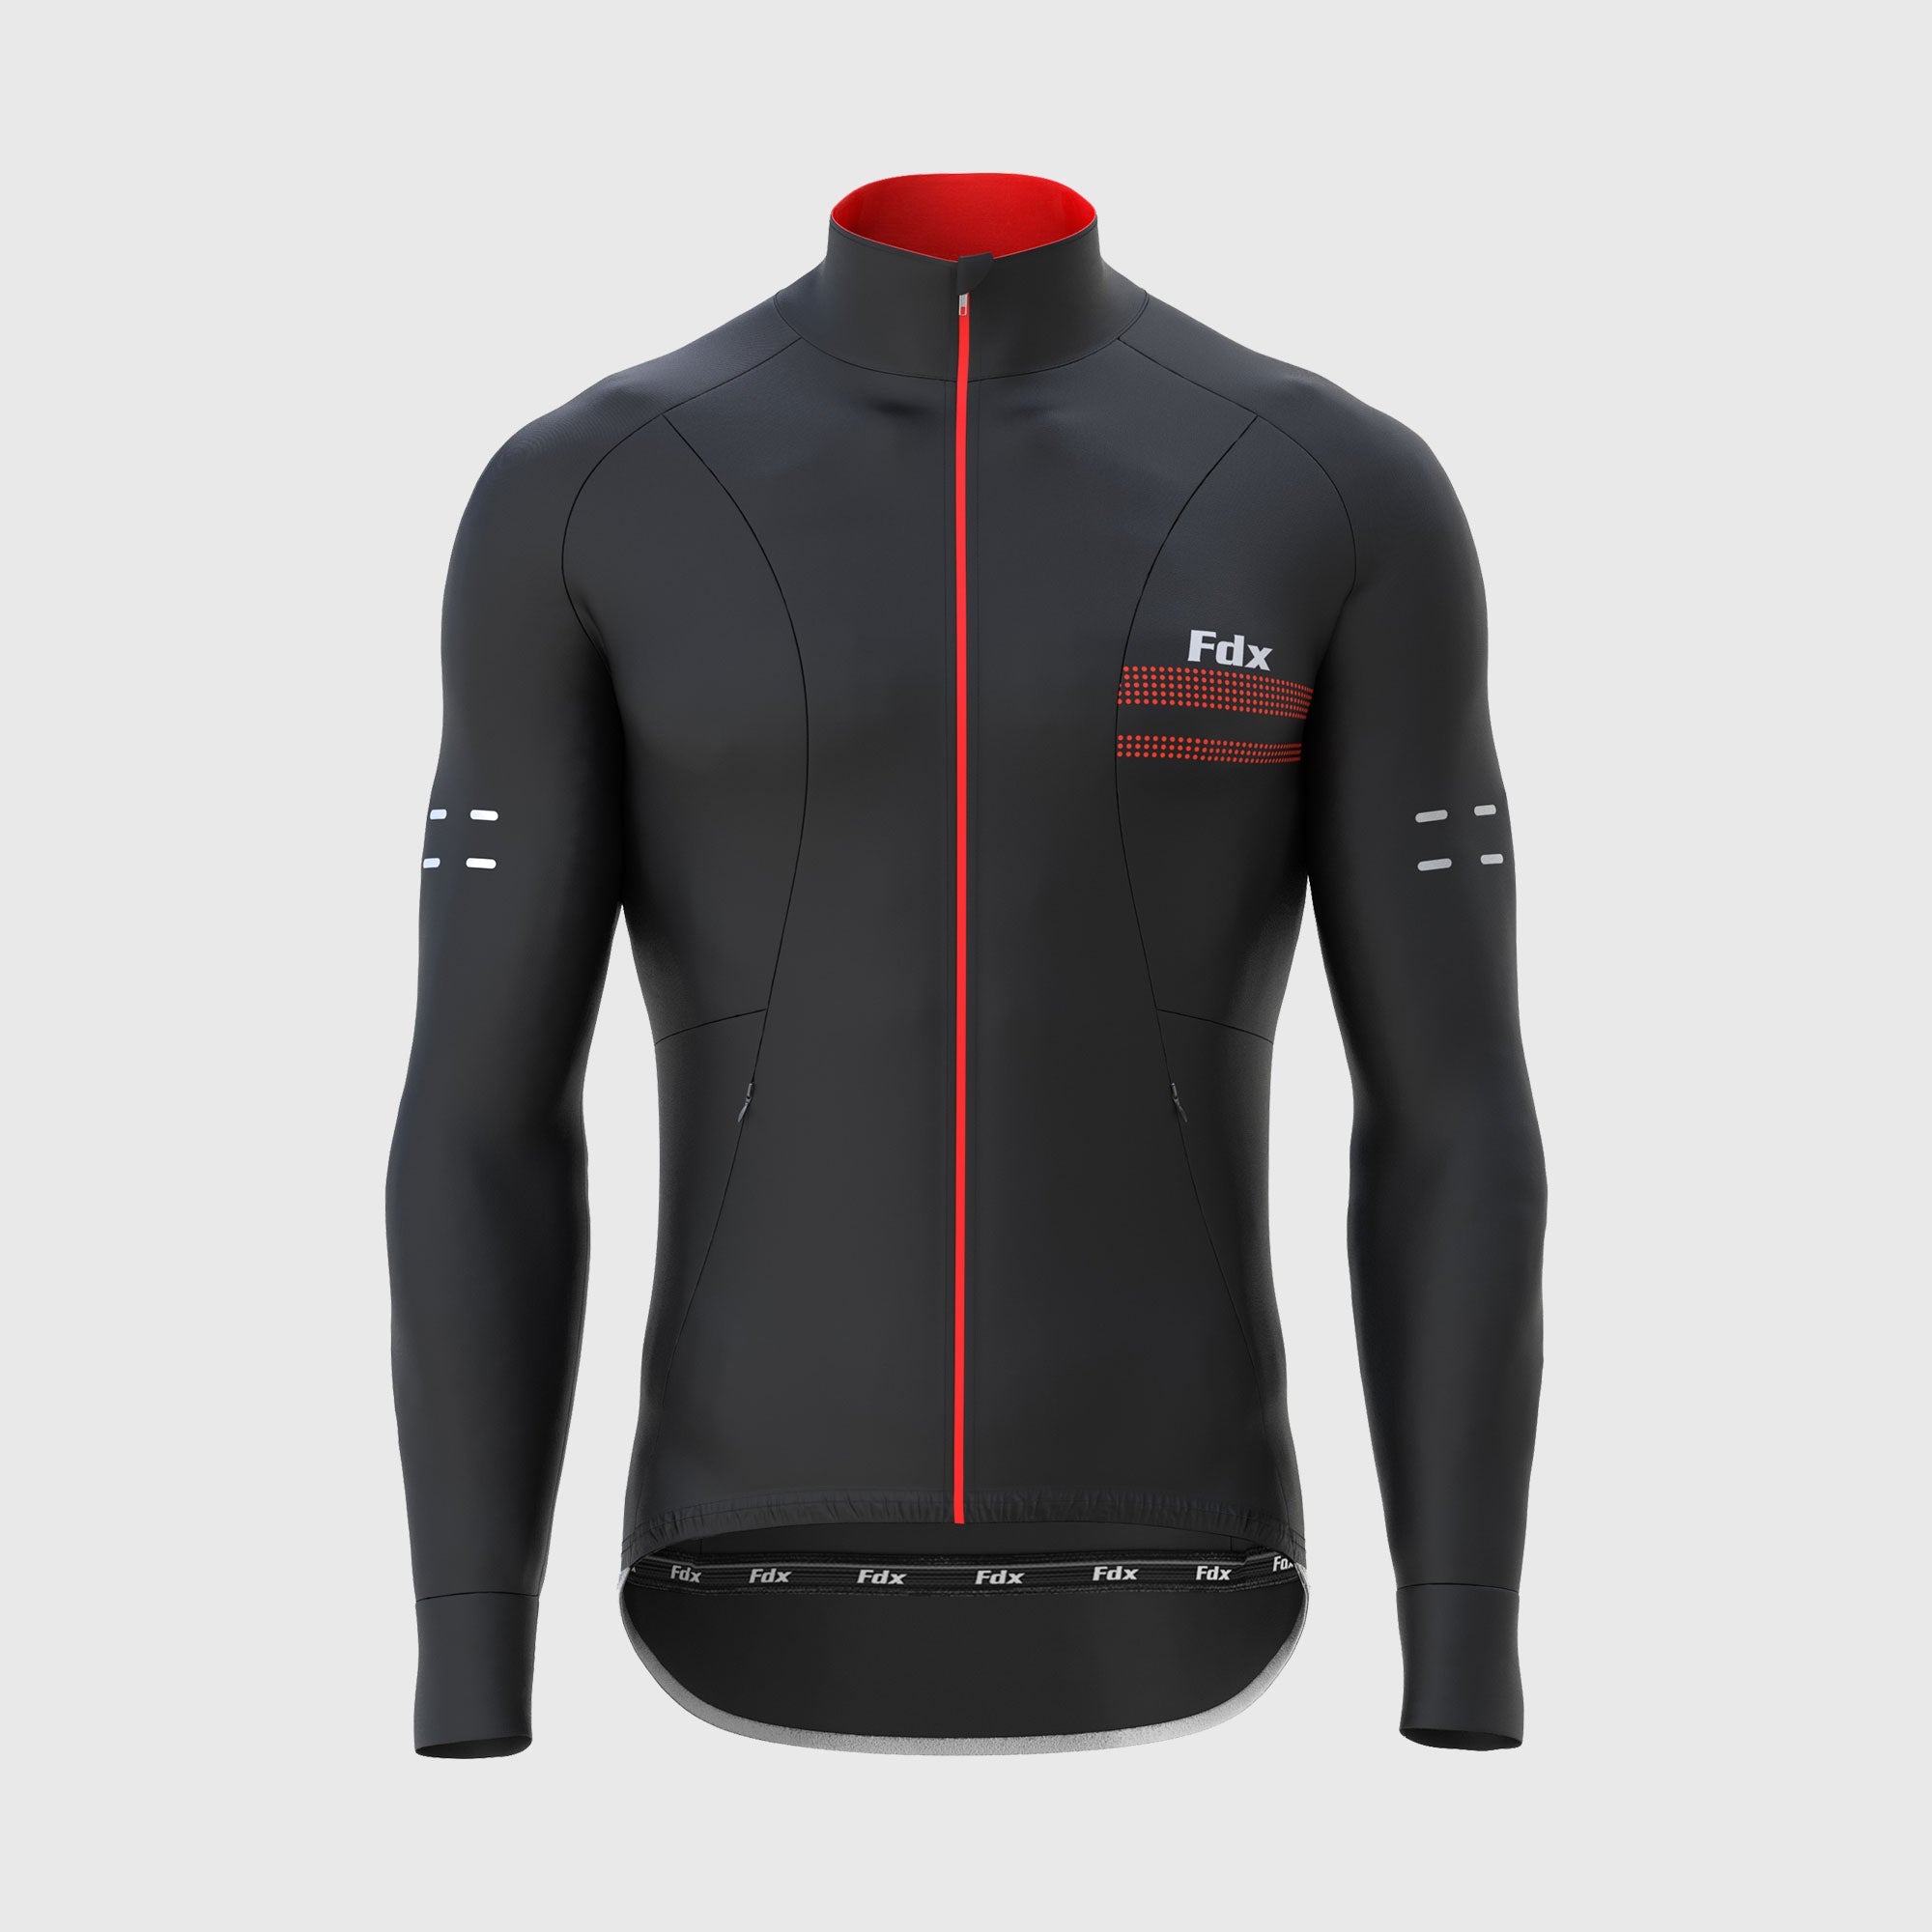 Related: Mix Men 1 Long Sleeve Jersey